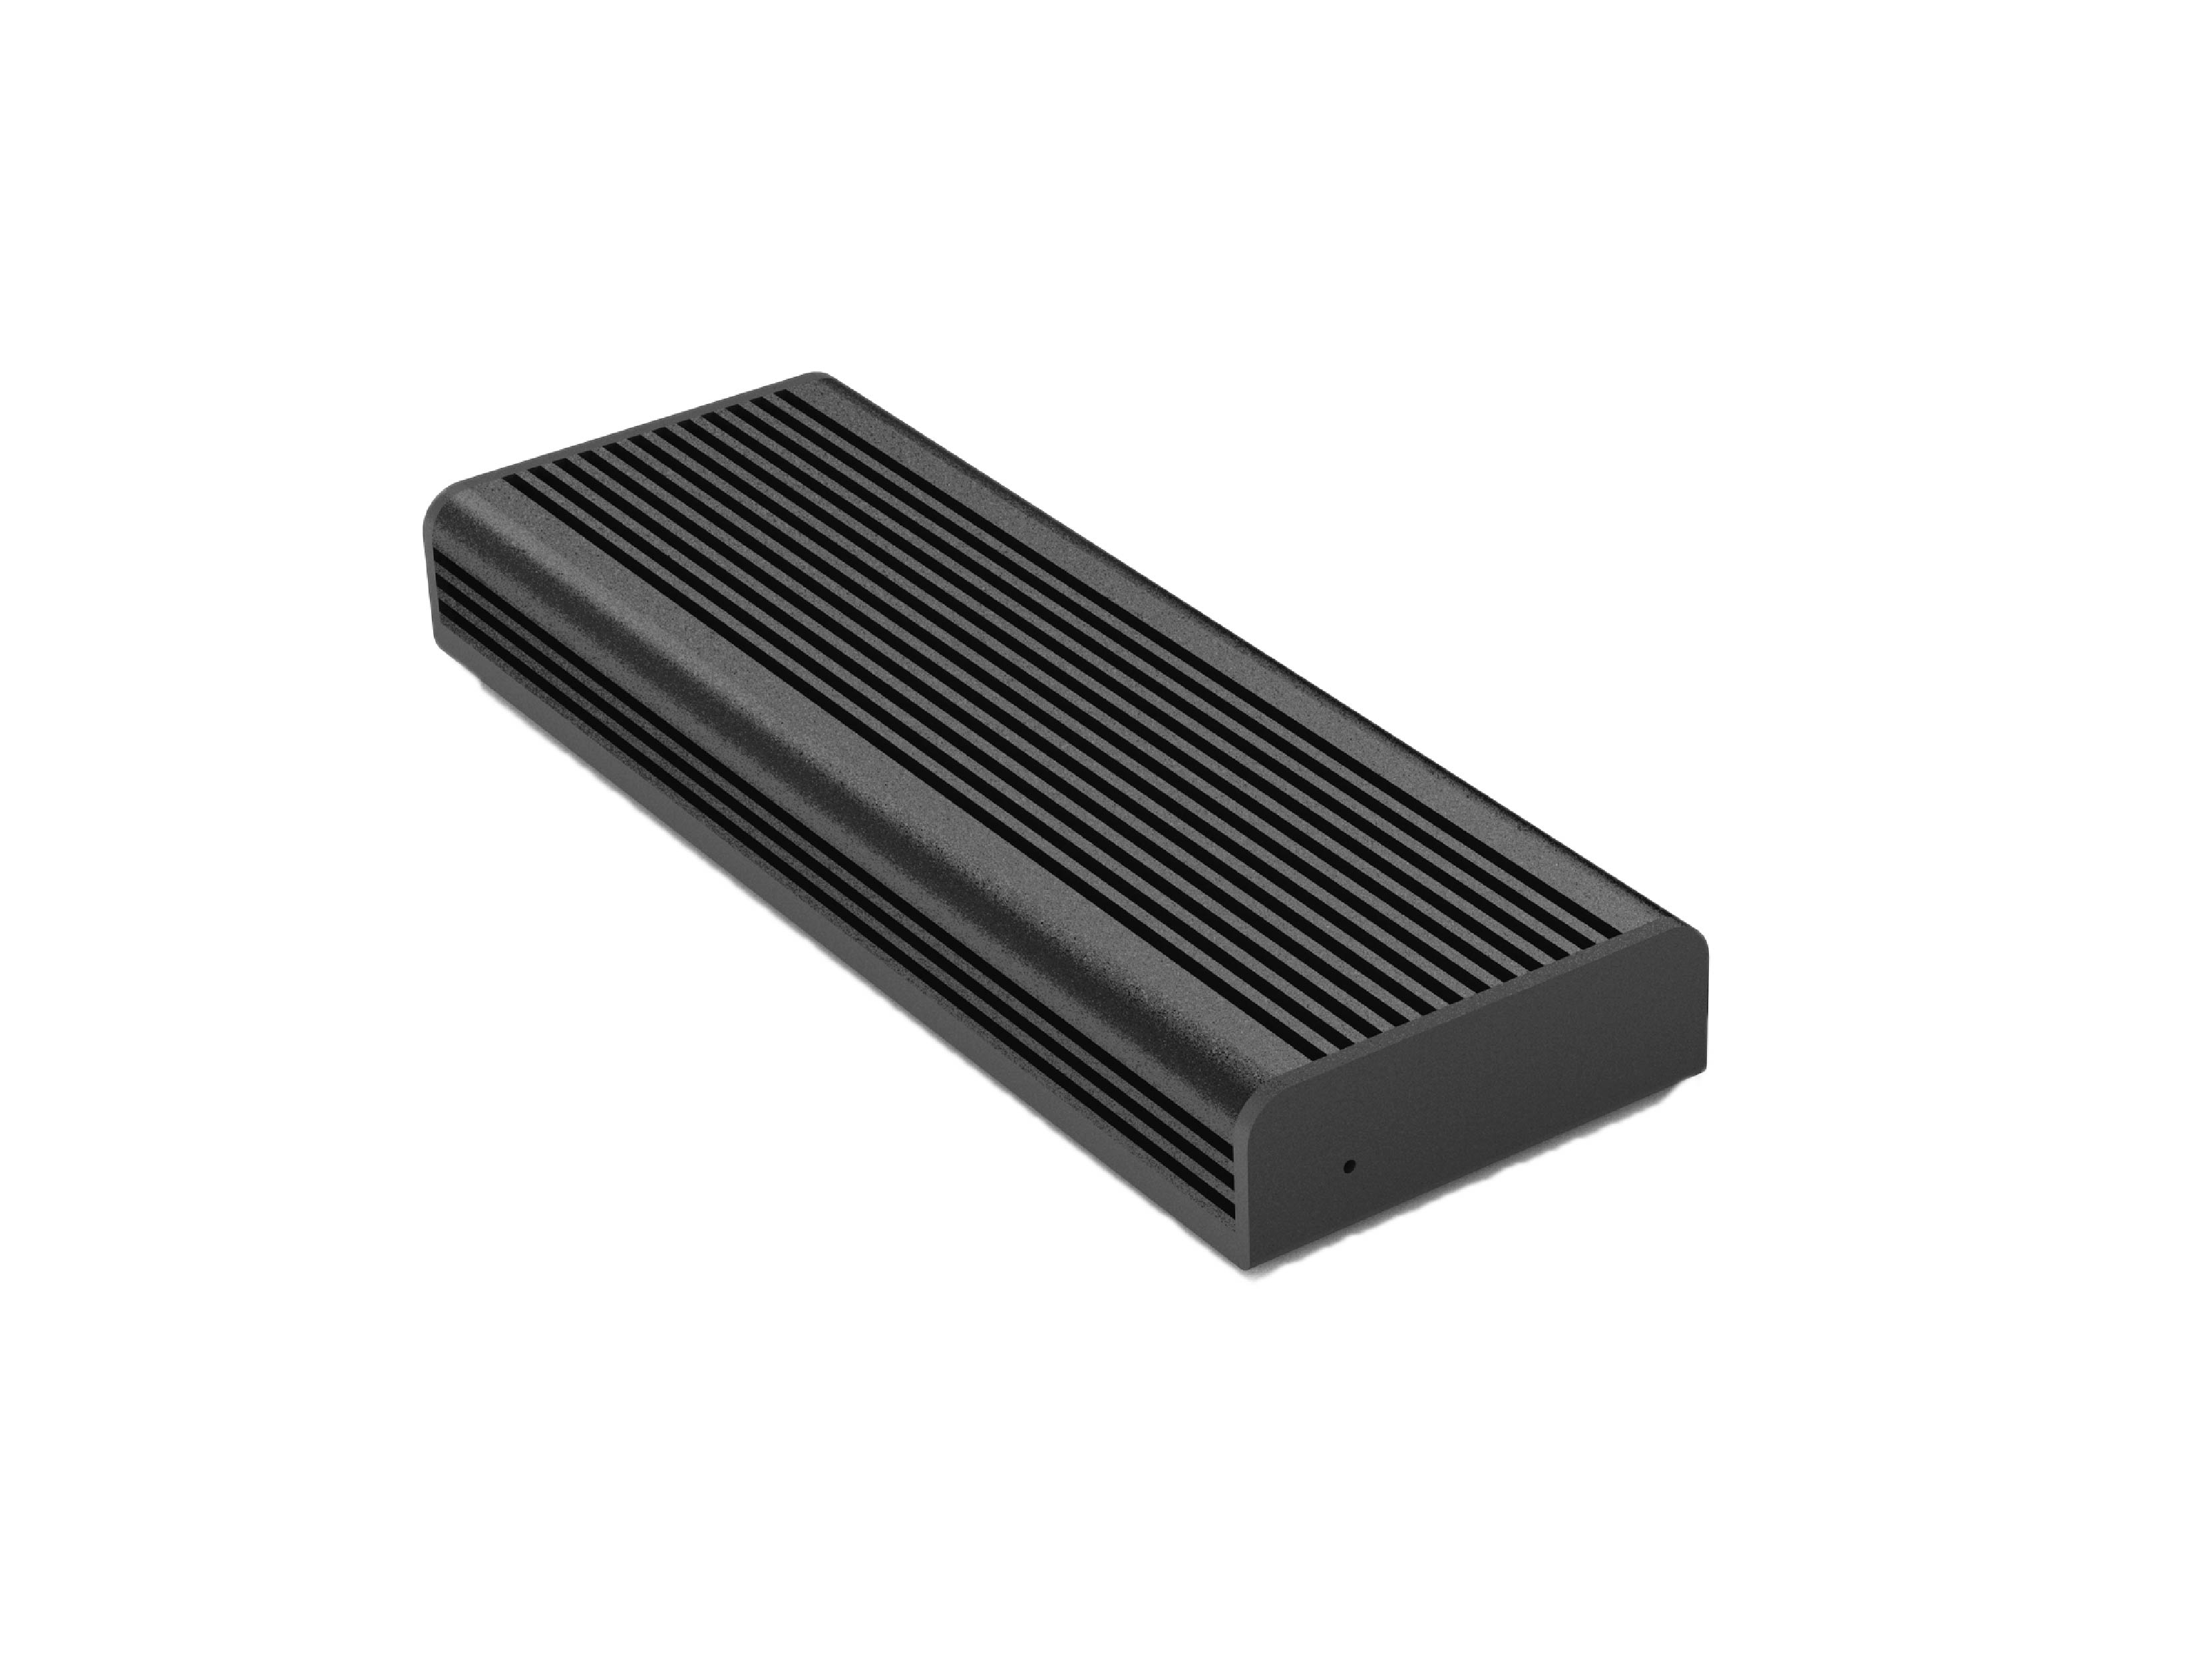 M.2 SSD Reader with Extra Storage Slot (SI-8009US31C), Support 1 M-key M.2 NVMe SSD 10Gbps, World patent, use the clips to switch SSDs, USB3.2 -C to host.